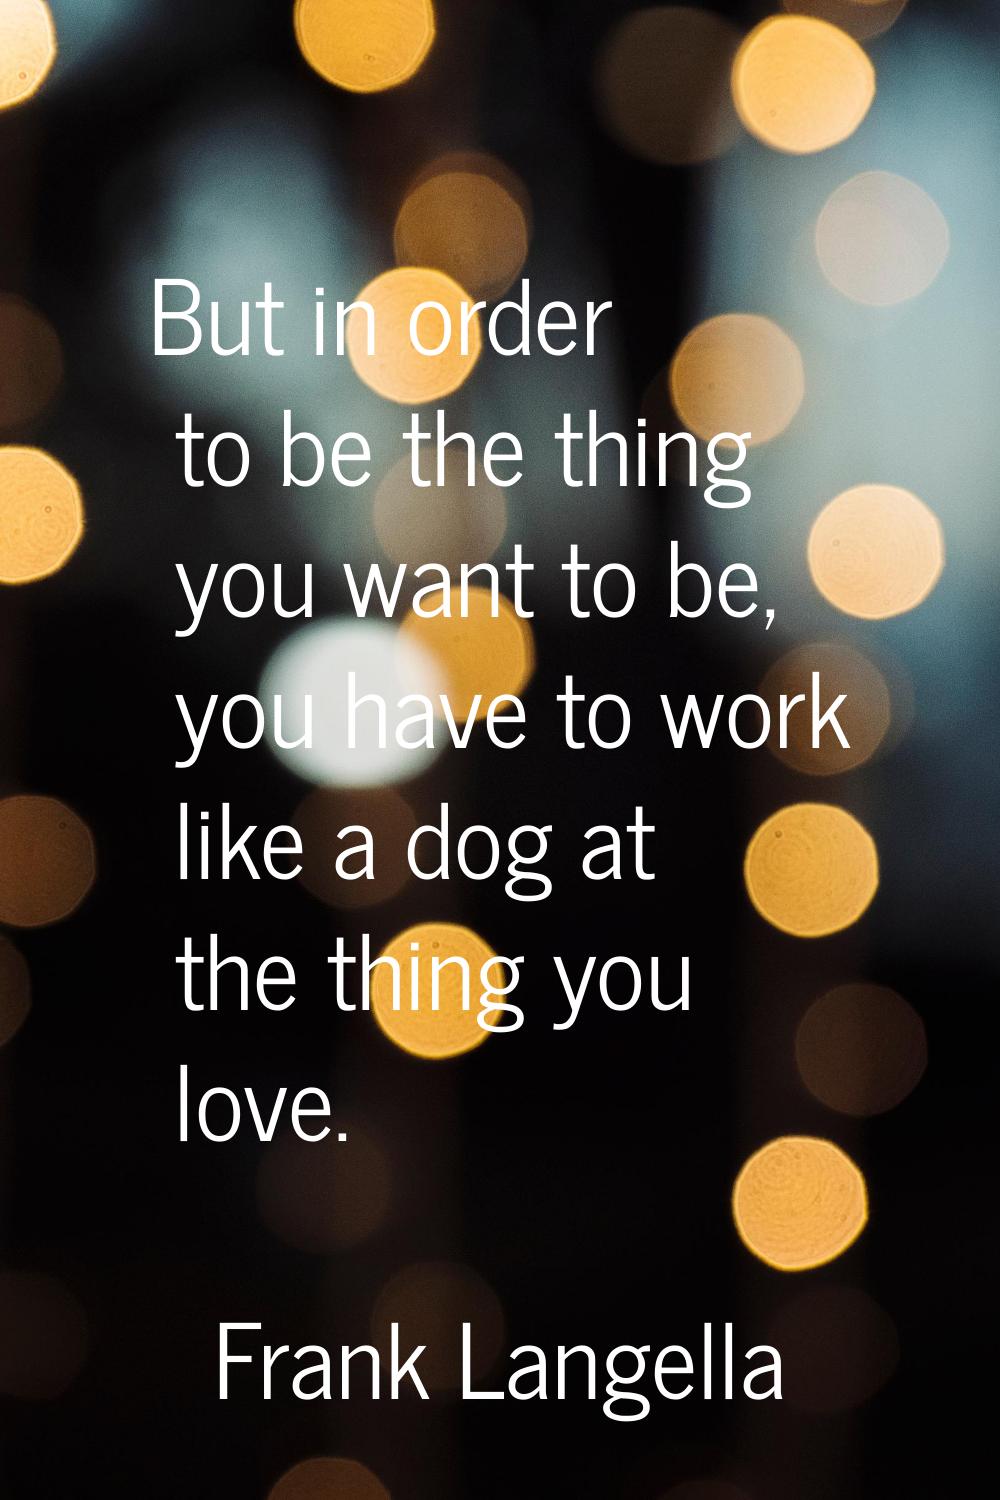 But in order to be the thing you want to be, you have to work like a dog at the thing you love.